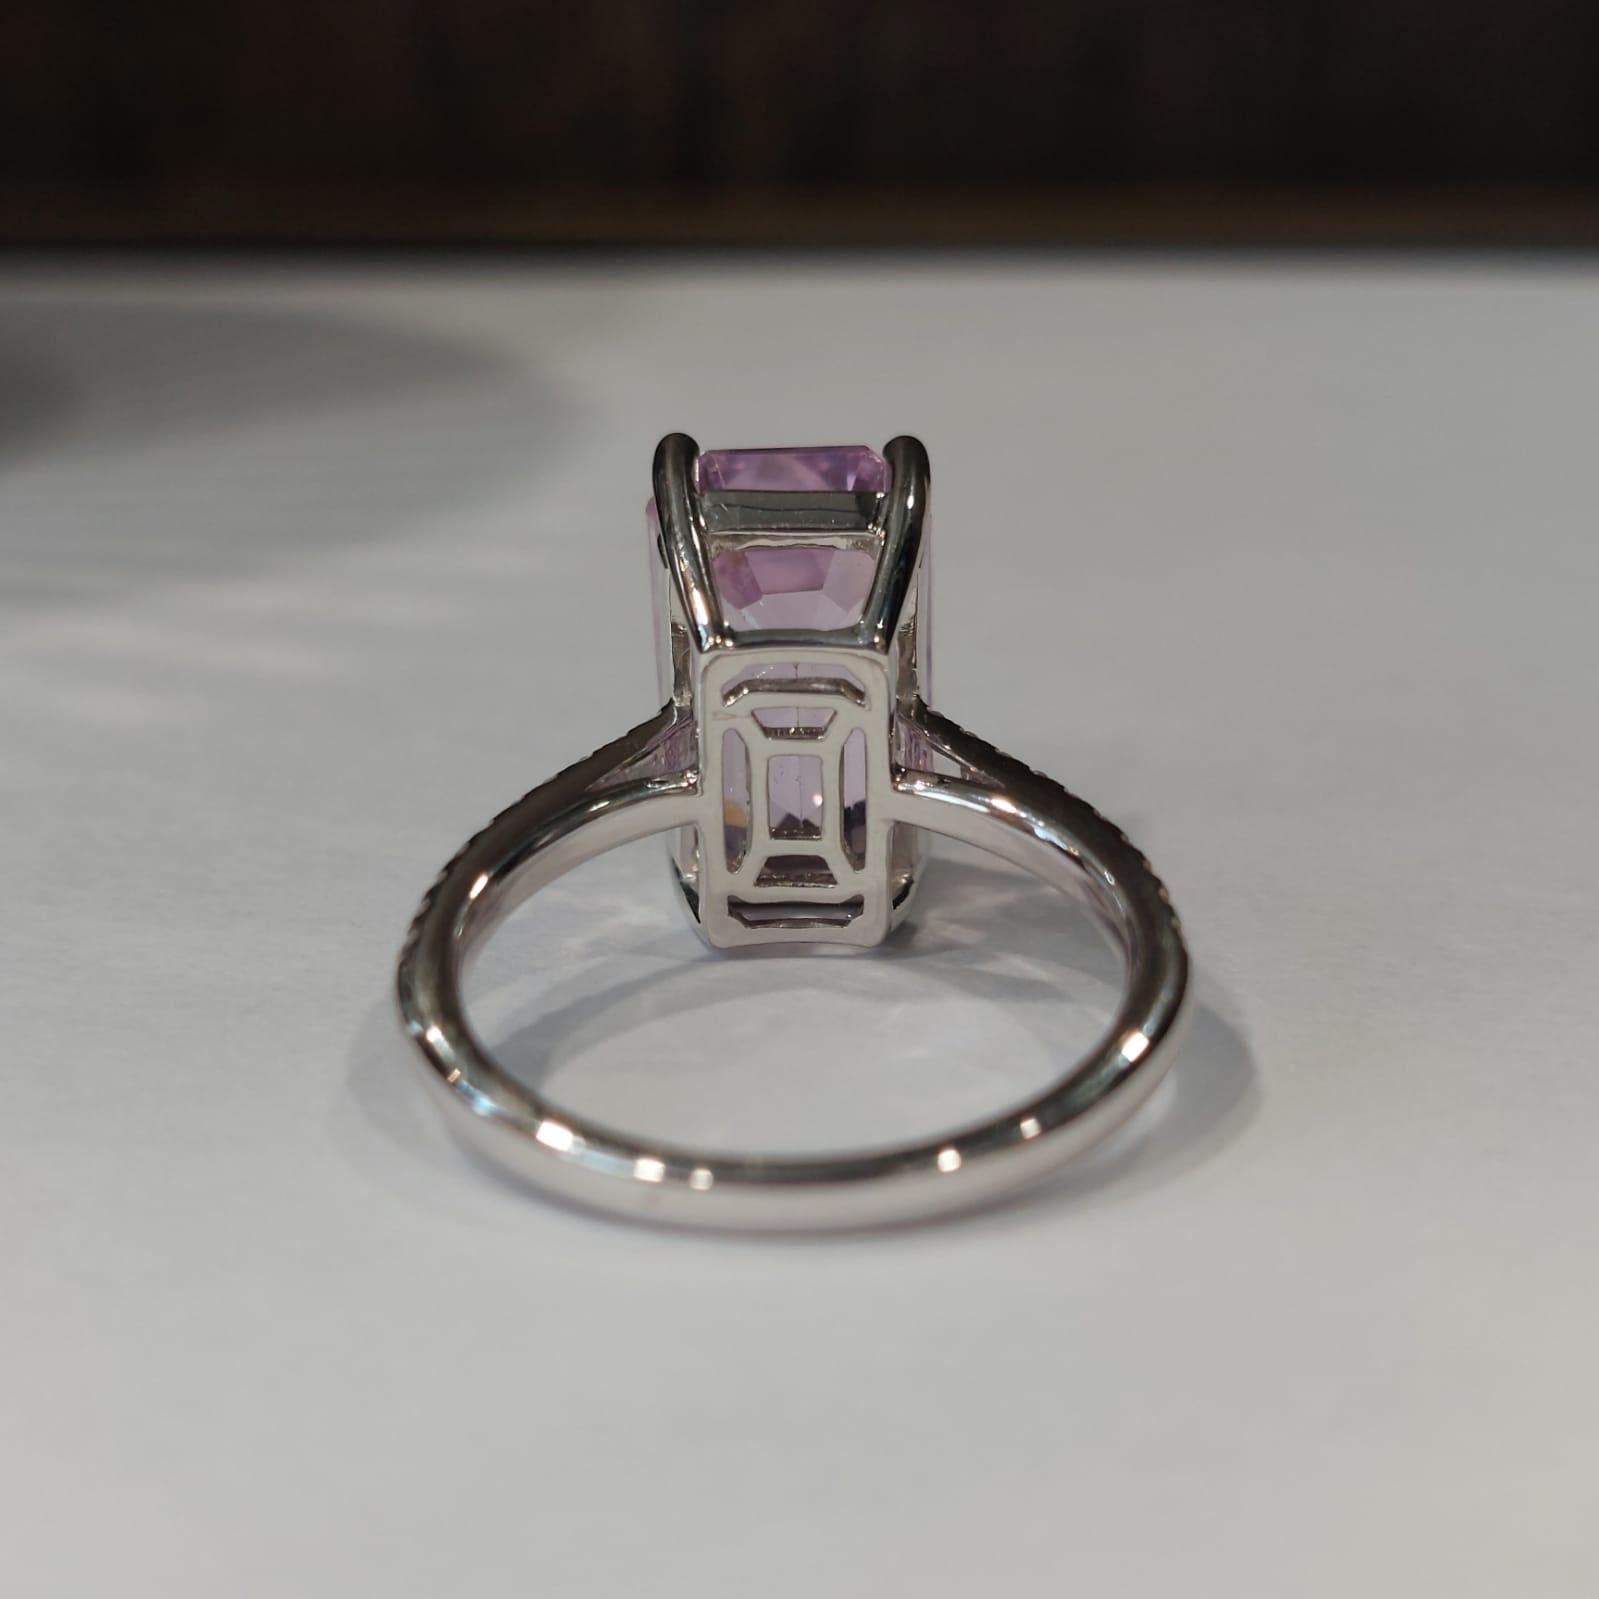 Gilin 18k White Gold Diamond Ring with Kunzite For Sale 2